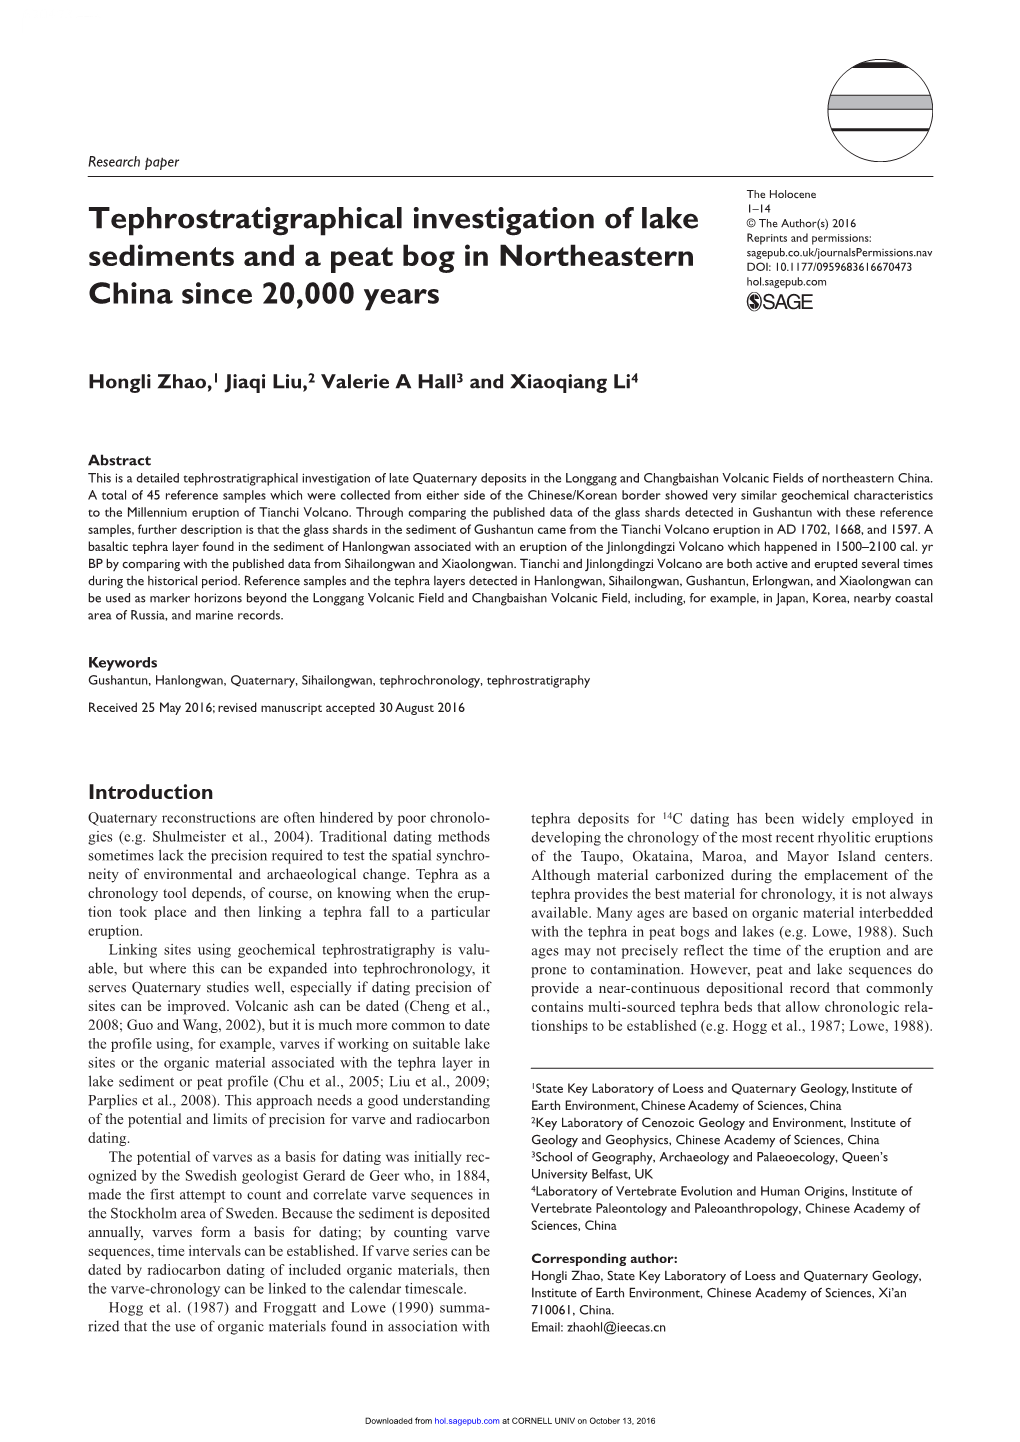 Tephrostratigraphical Investigation of Lake Sediments and a Peat Bog in Northeastern China Since 20,000 Years